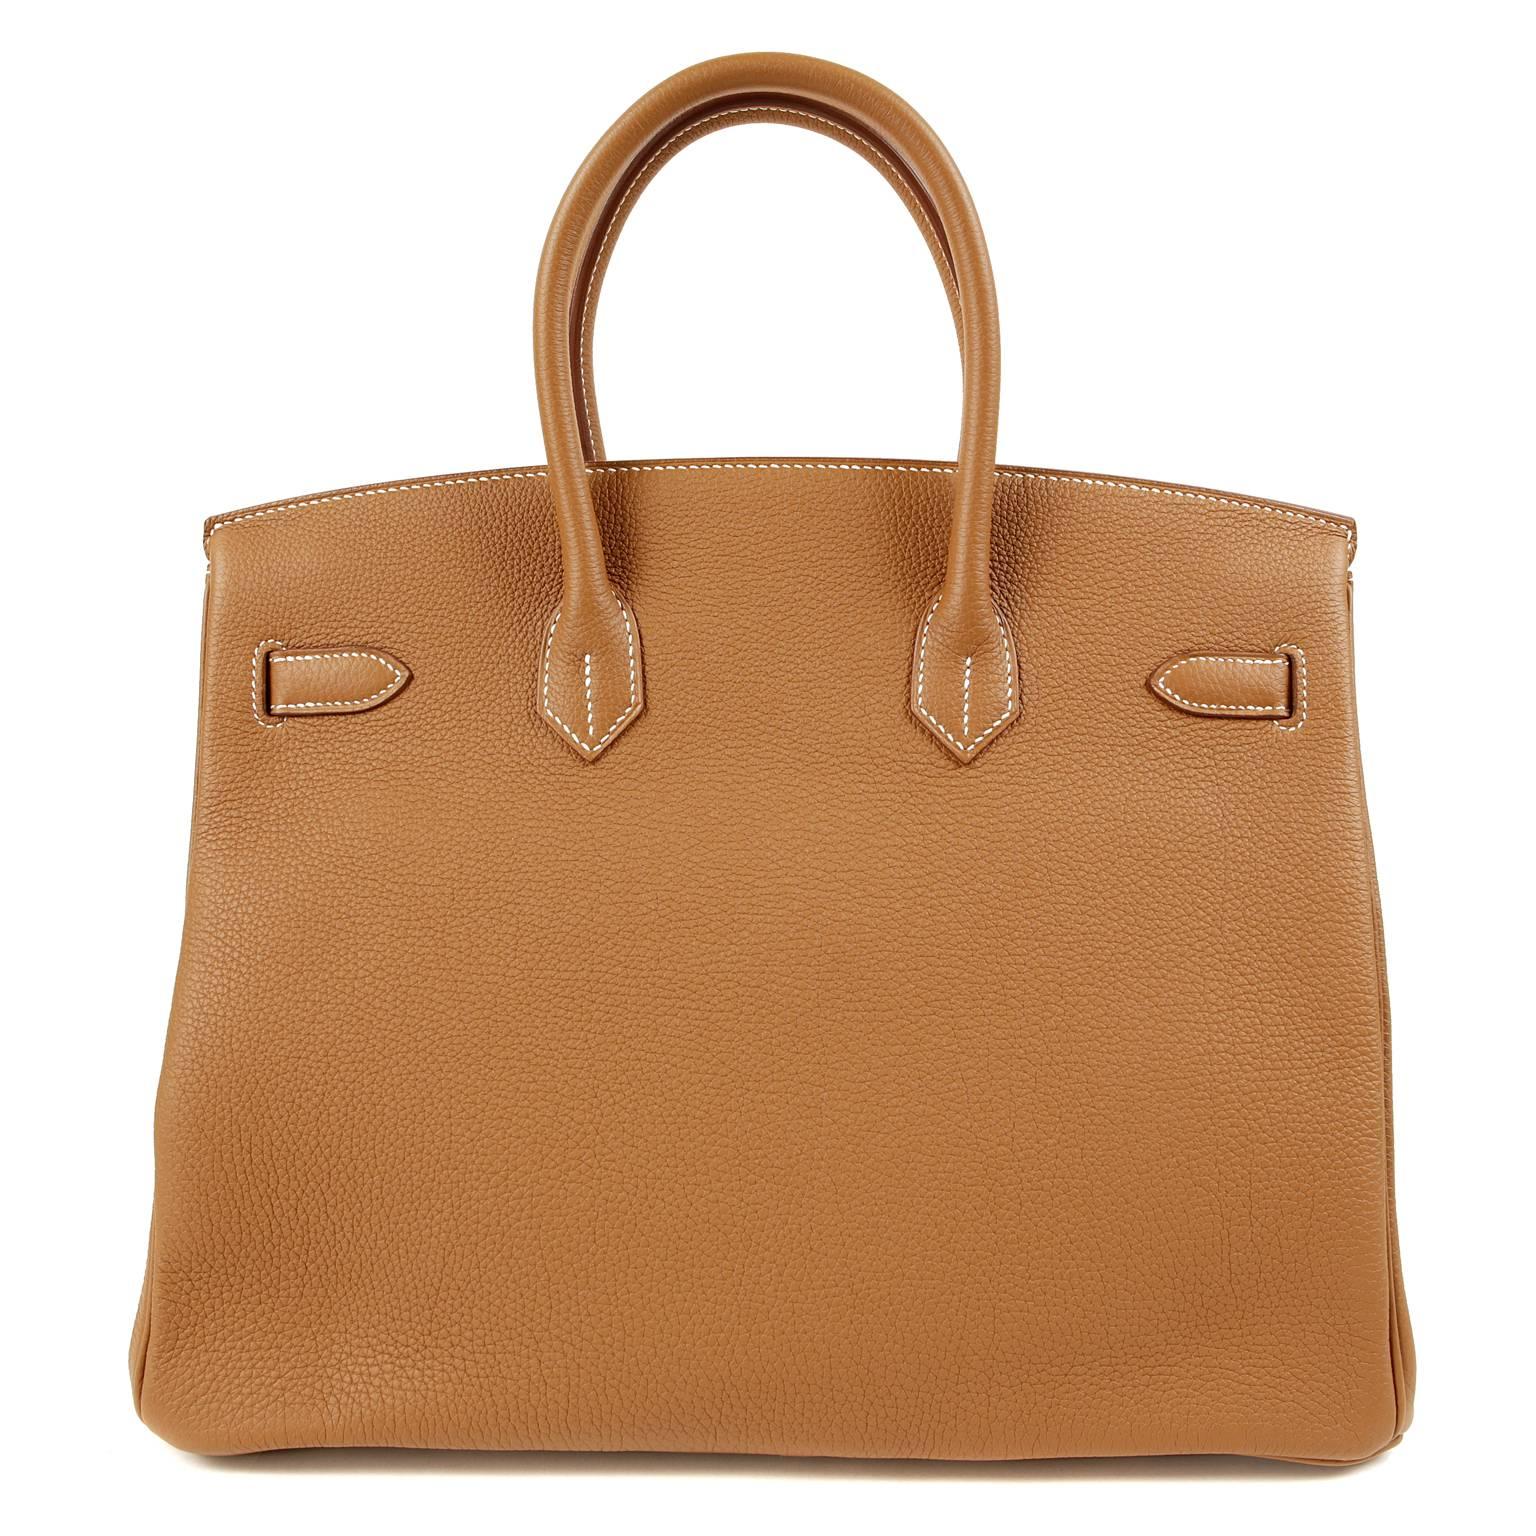 Hermès 35 cm Gold Birkin Bag in Togo leather with Palladium hardware, T stamp.  Pristine unworn condition.  Plastic is intact on all hardware.
 
Waitlists exceeding a year are commonplace for the intensely coveted classic Gold leather Birkin bag.